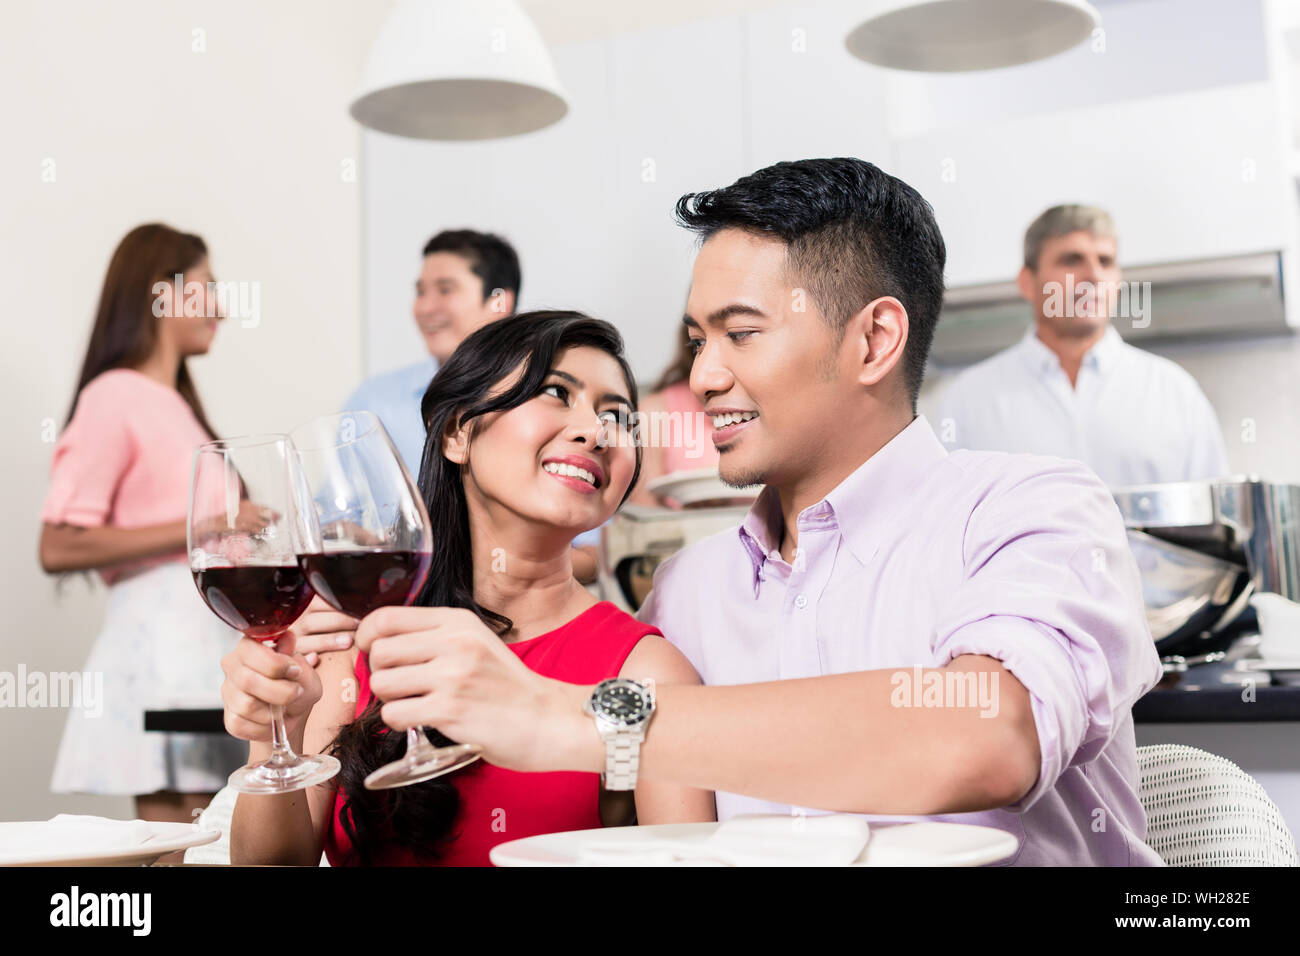 Smiling young couple toasting wine glasses Stock Photo